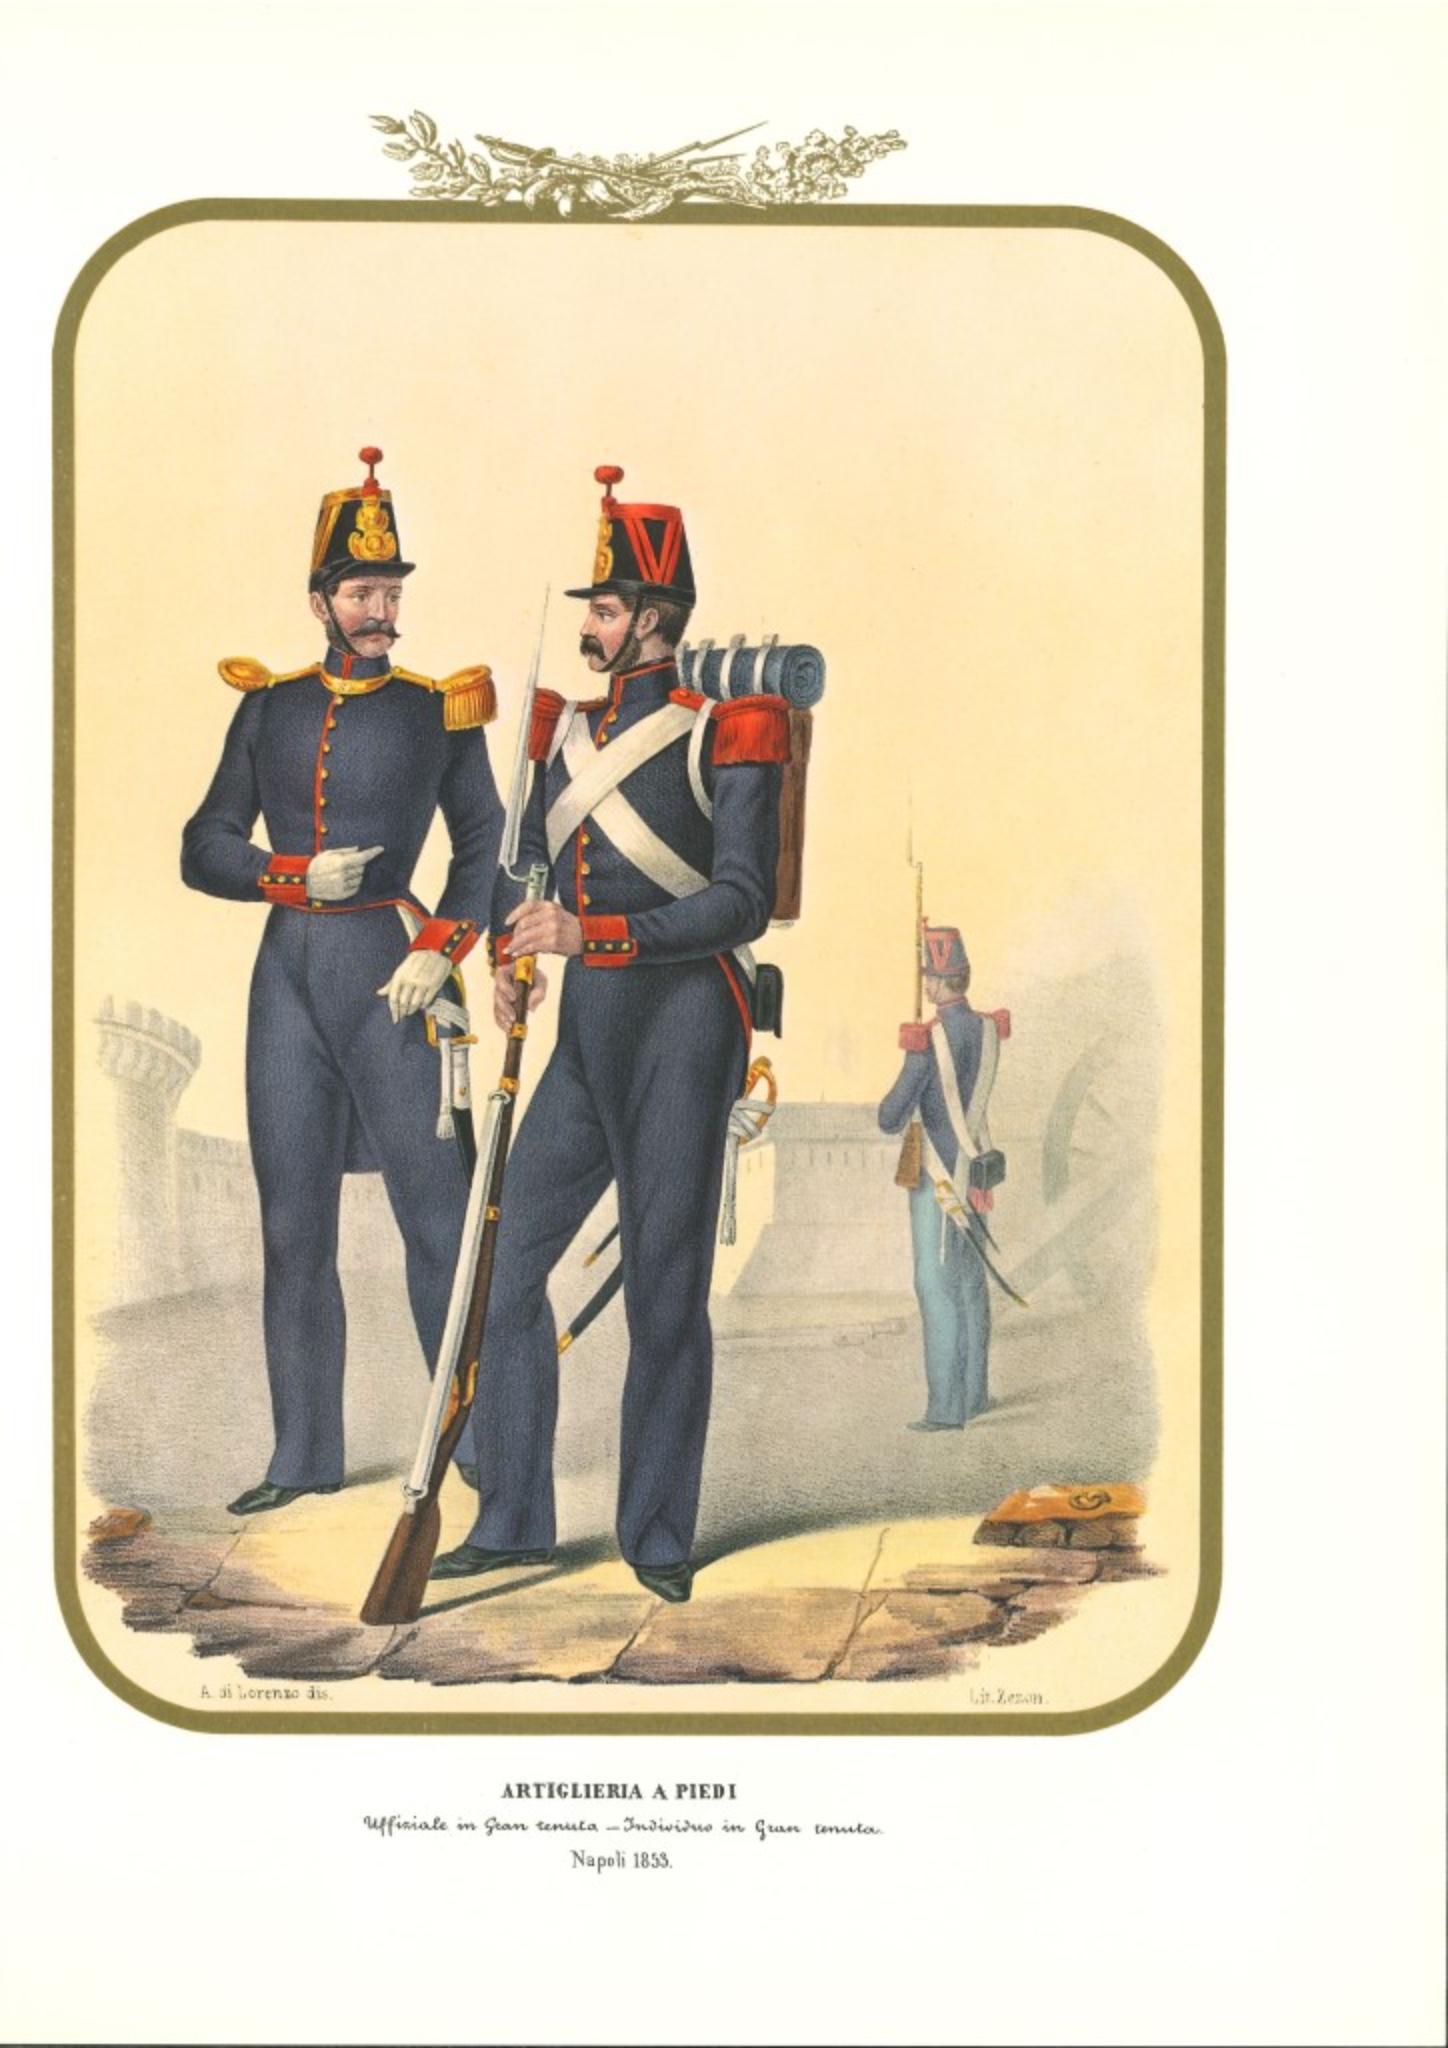 Artillery is a lithograph by Antonio Zezon. Naples 1853.

Interesting colored lithograph which describes some members of the Artillery:  Official in dress uniform - Individual in dress uniform.

In excellent condition, this print belongs to one of